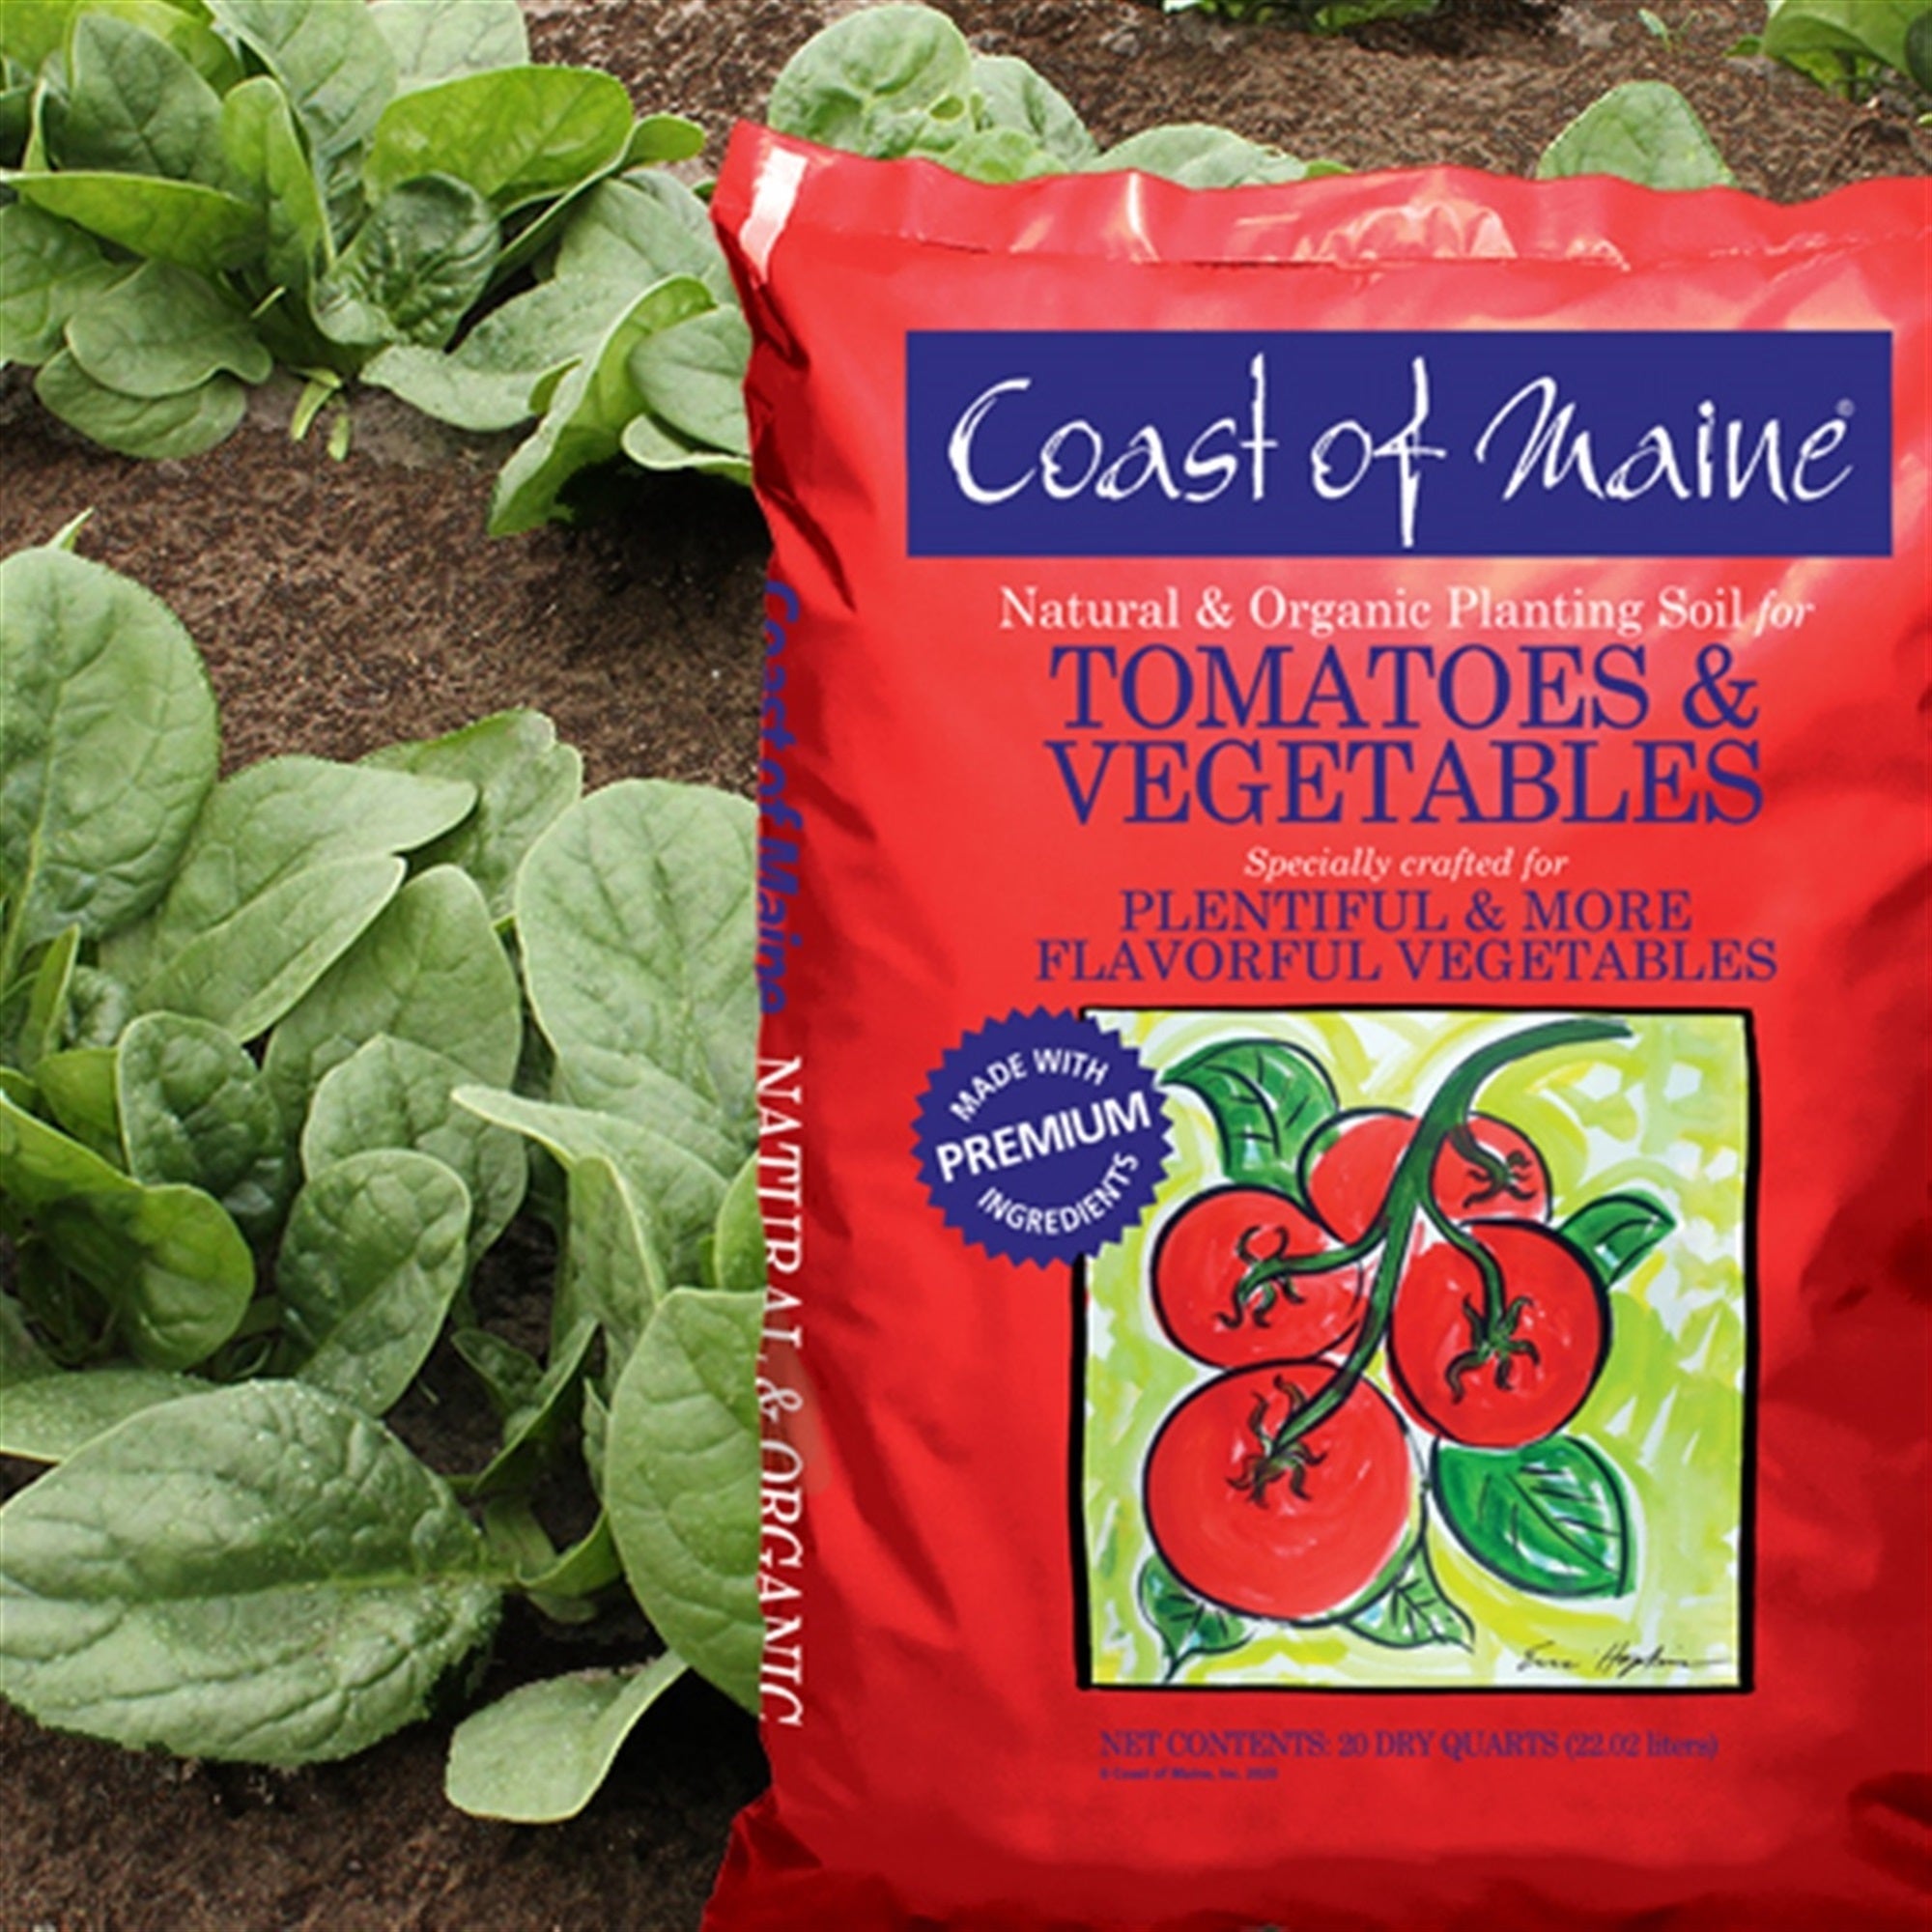 Coast of Maine Organic & Natural Planting Soil for Tomatoes & Vegetables, 20 QT